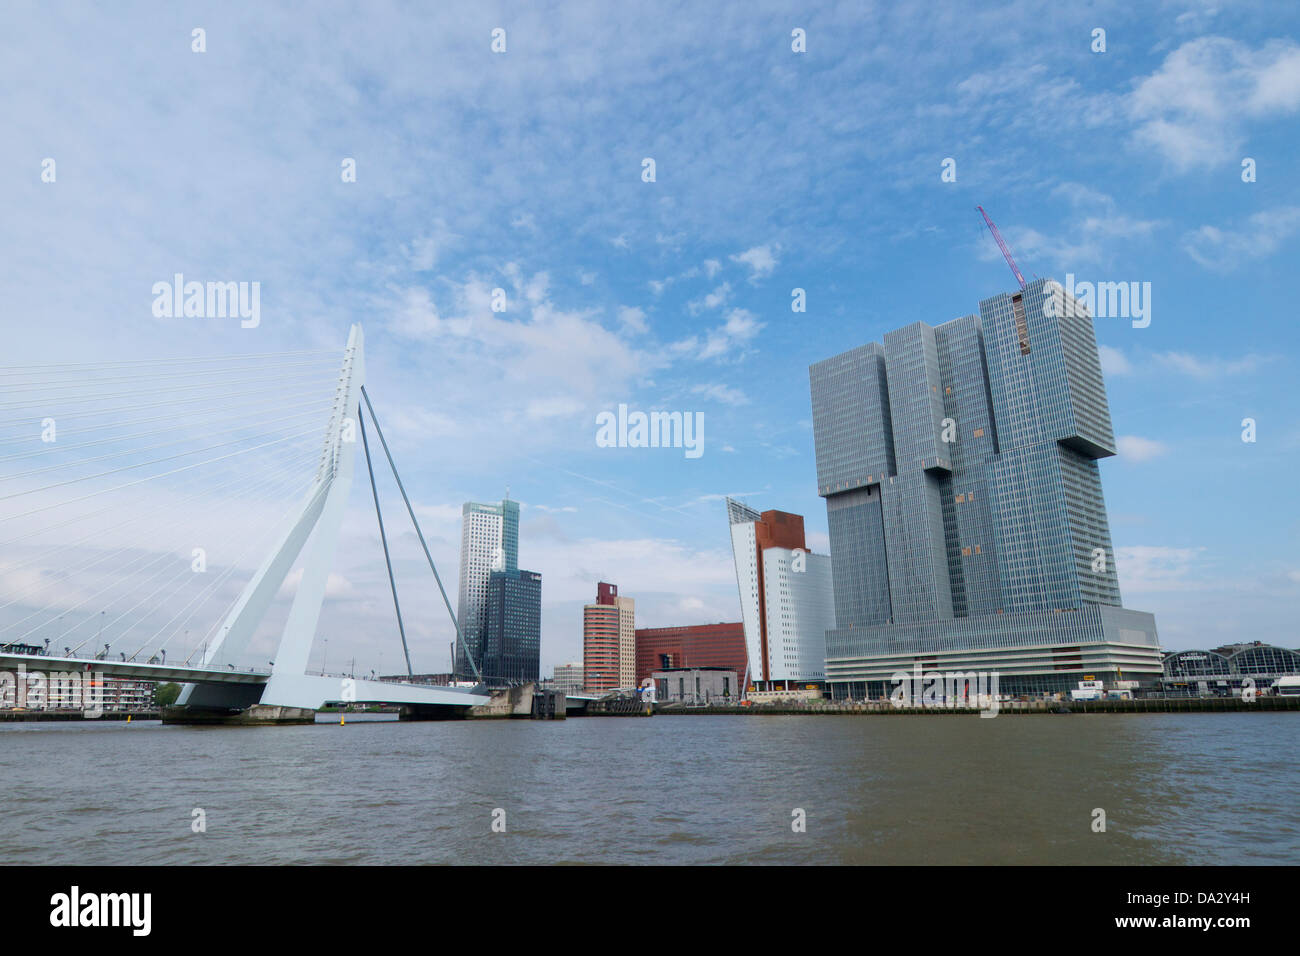 the kop van zuid area of the city centre of Rotterdam, the Netherlands Stock Photo